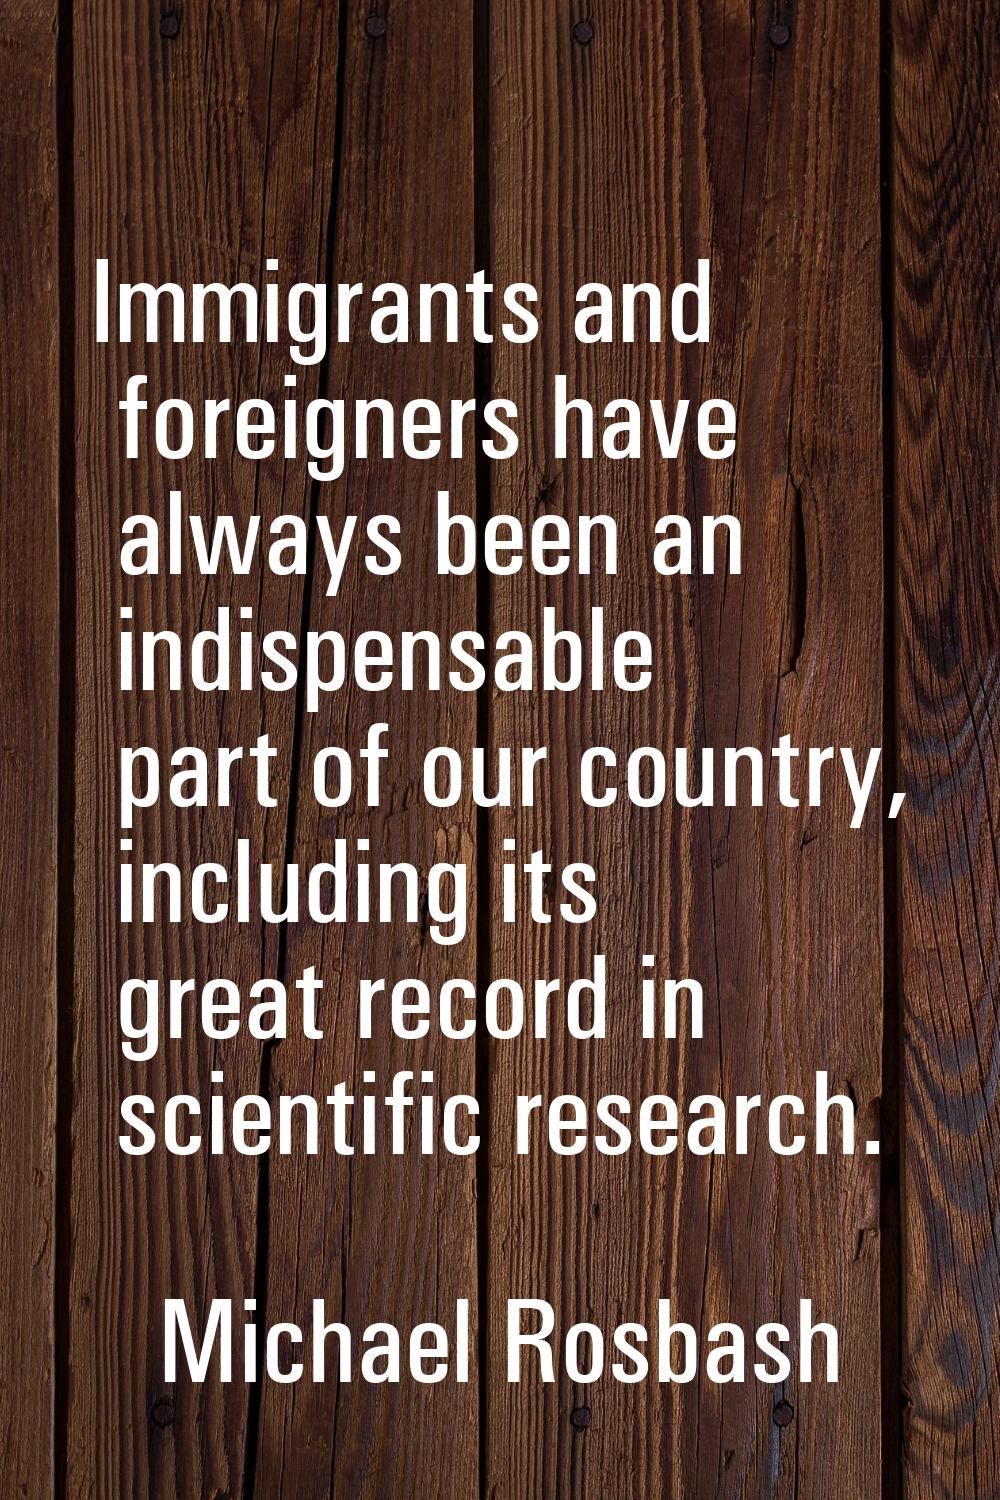 Immigrants and foreigners have always been an indispensable part of our country, including its grea